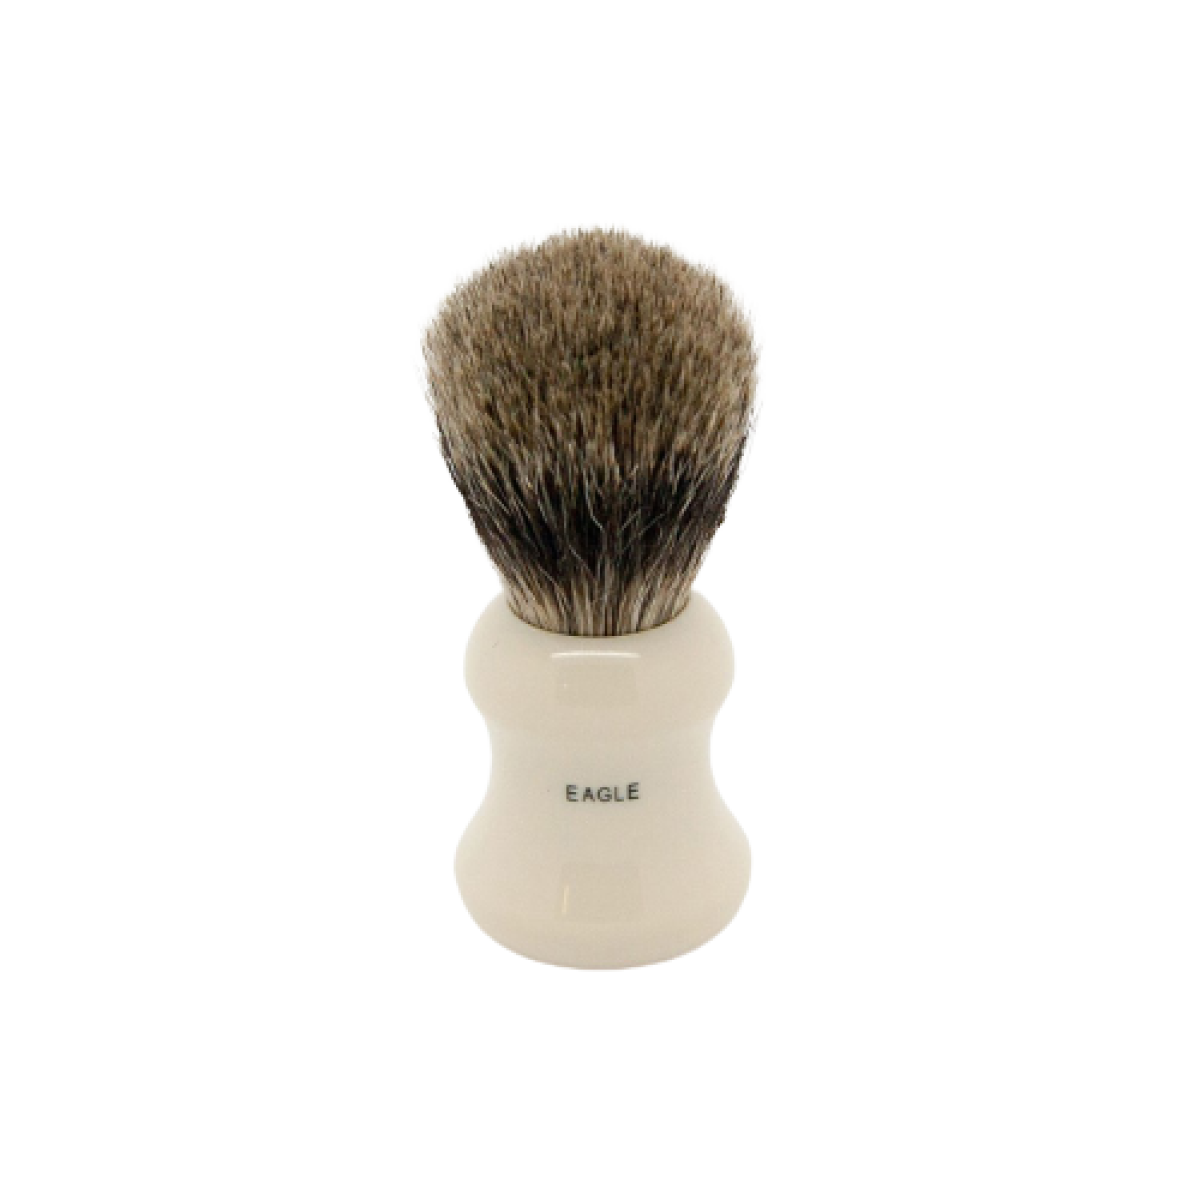 Simpsons G3 'Eagle' Pure Badger Shave Brush  #10083386